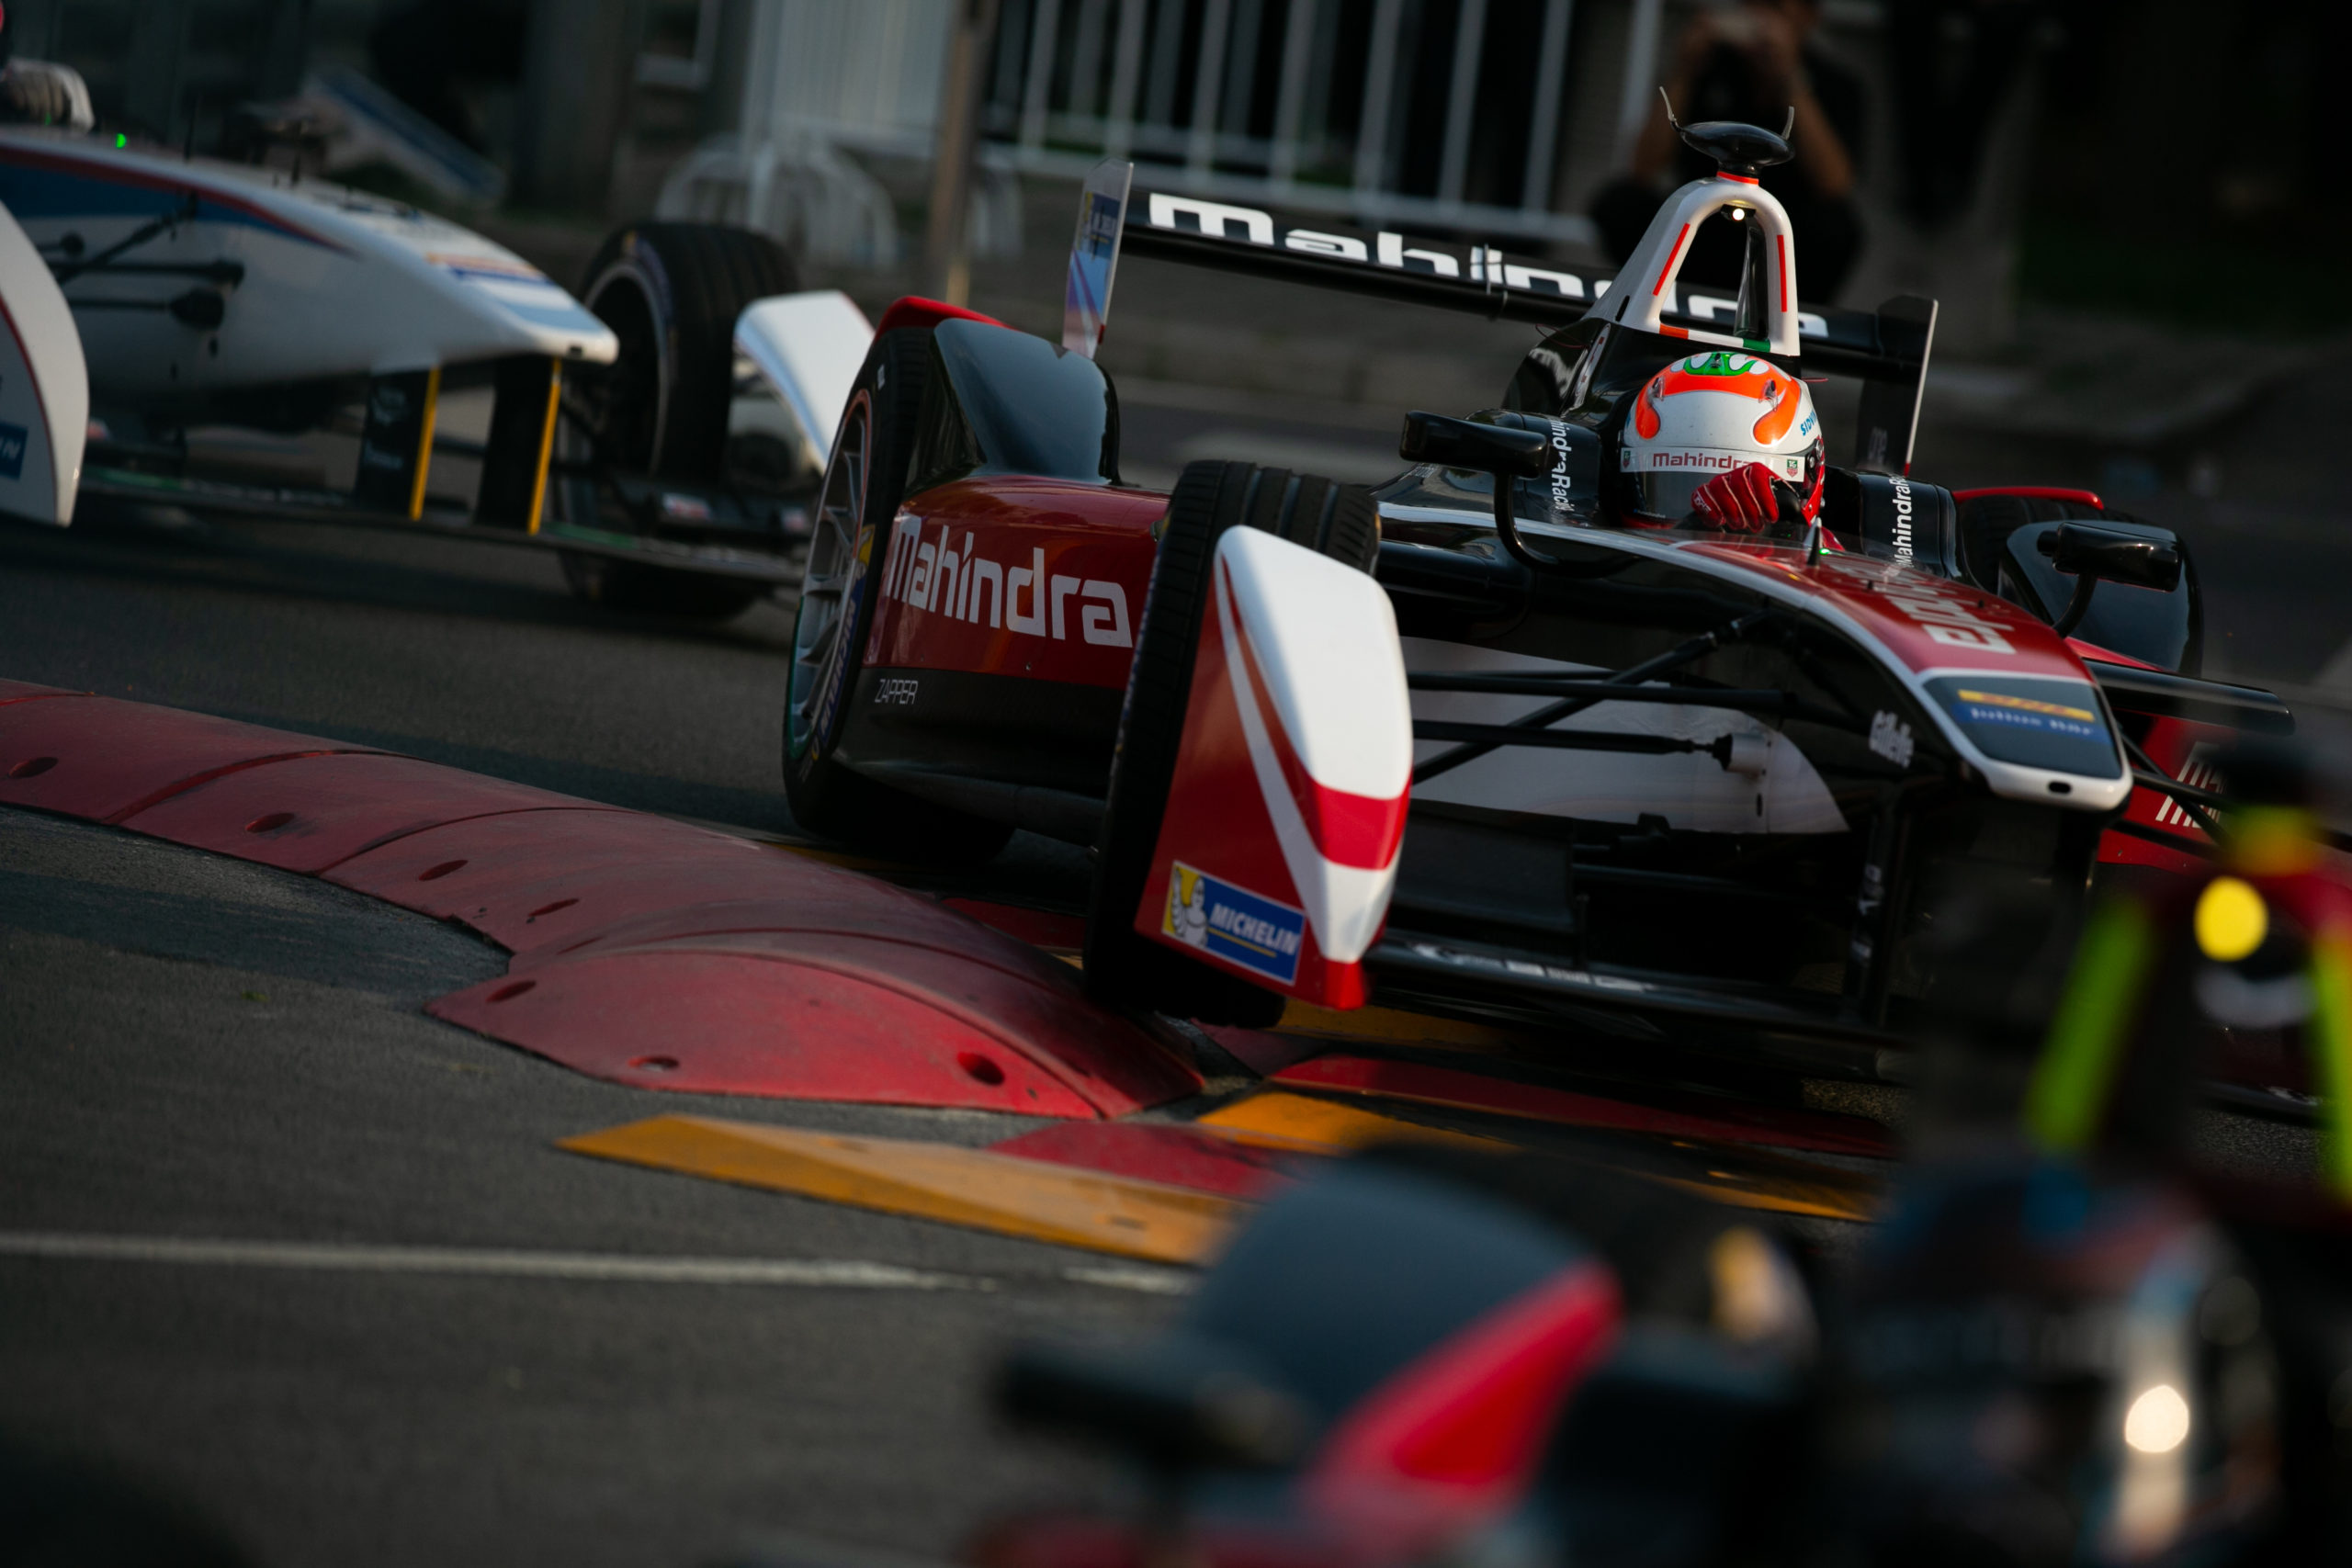 stark reality sets in for a formula e legend in the midfield